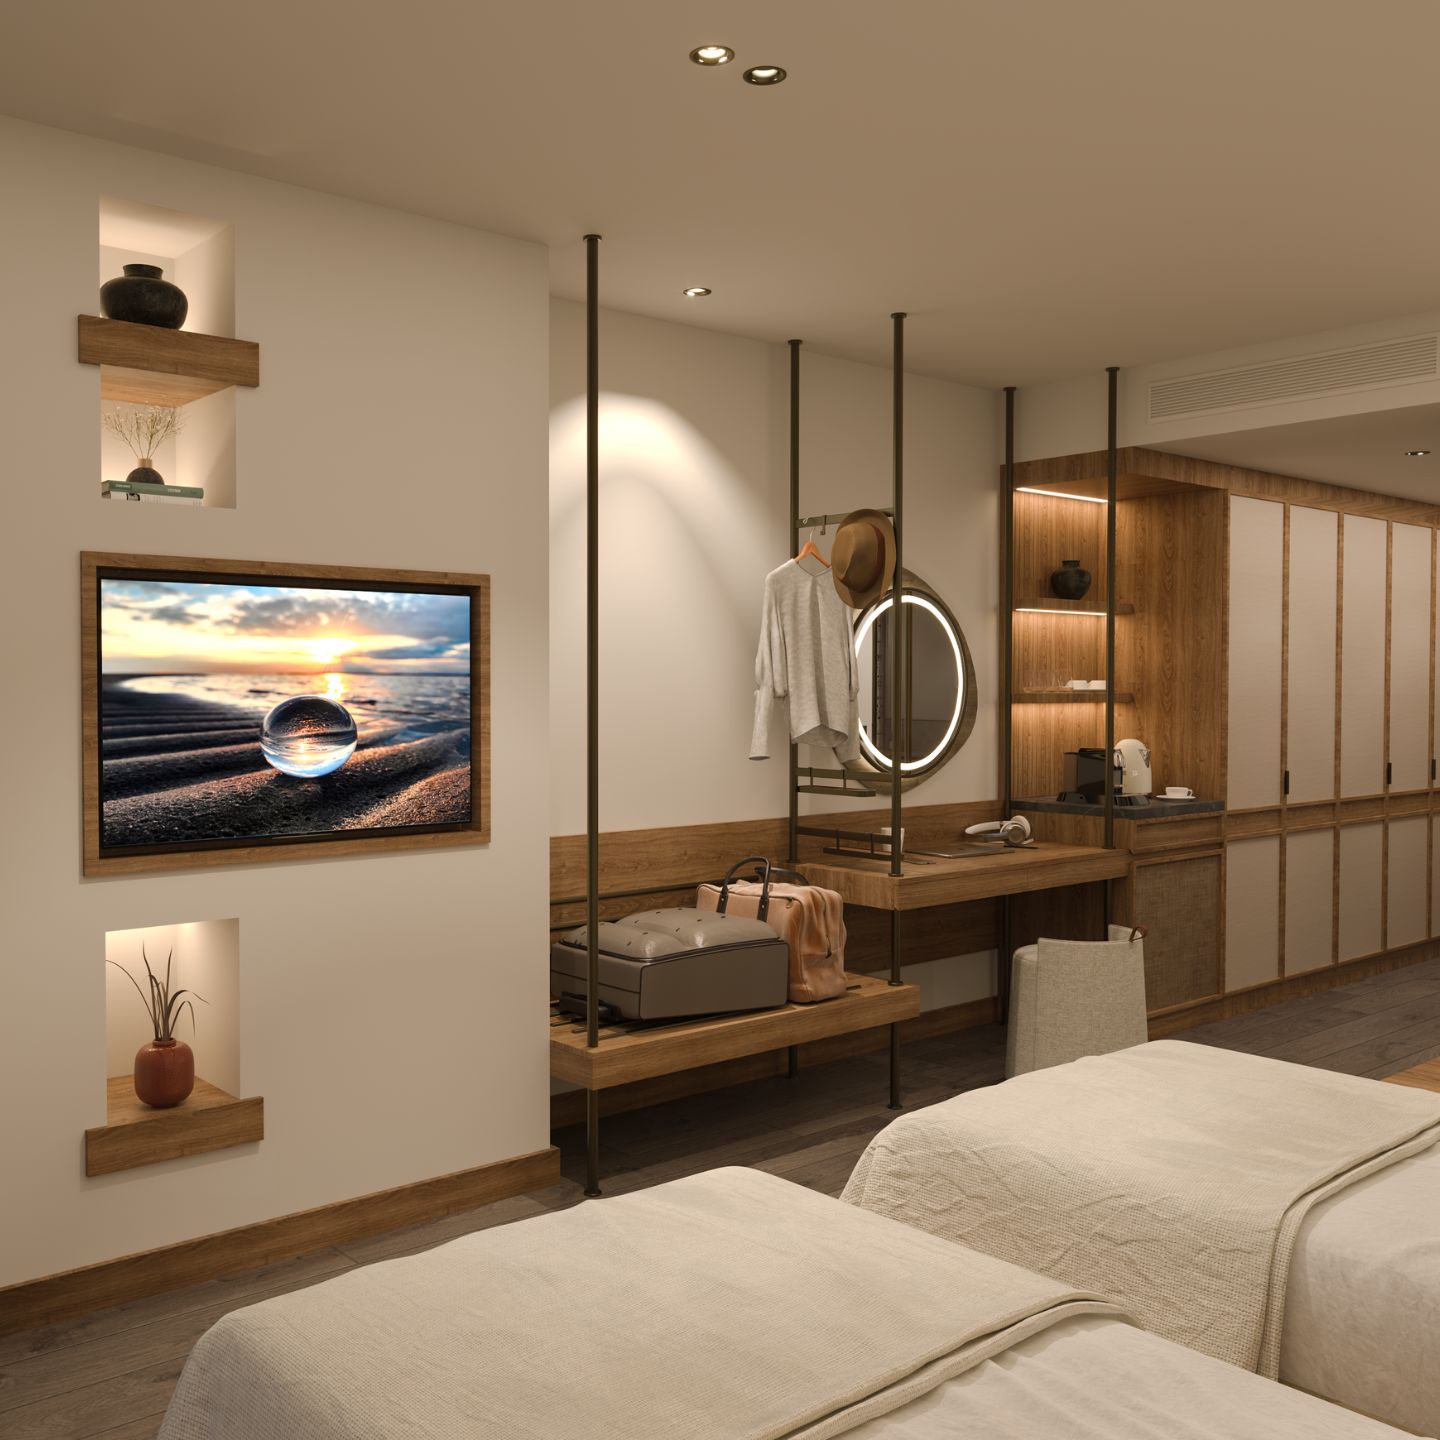 Angled view of two beige twin beds facing a tv on the wall with wooden bench and wooden vanity